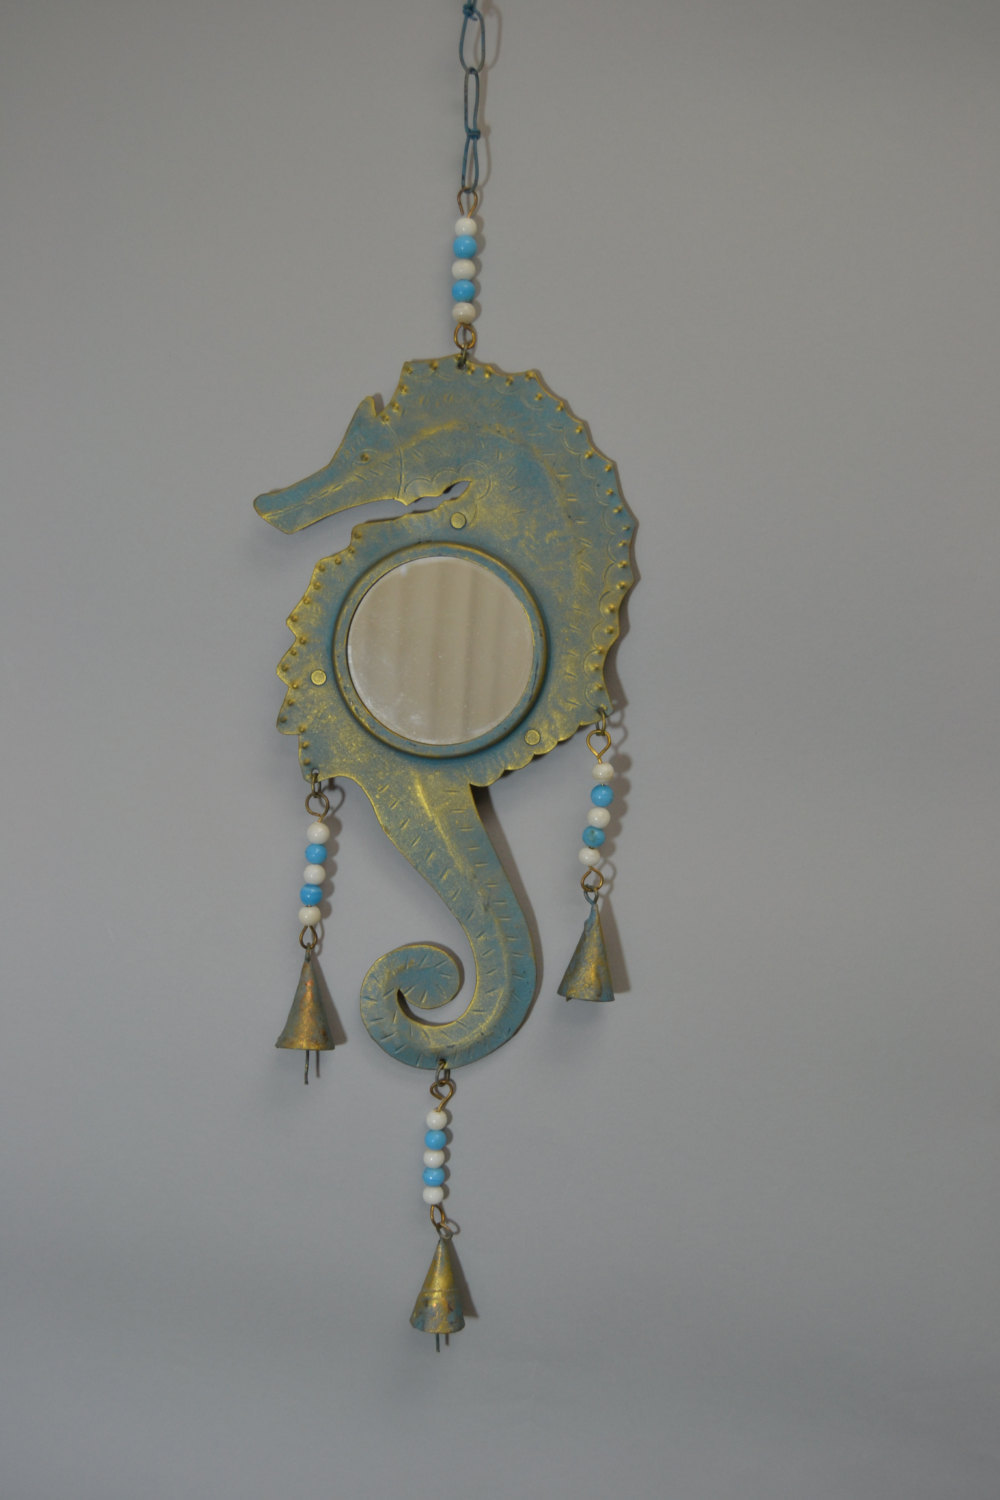 SEAHORSE rusty IRON metal mirror wall hanger beach handcrafted #f-916 - $12.00